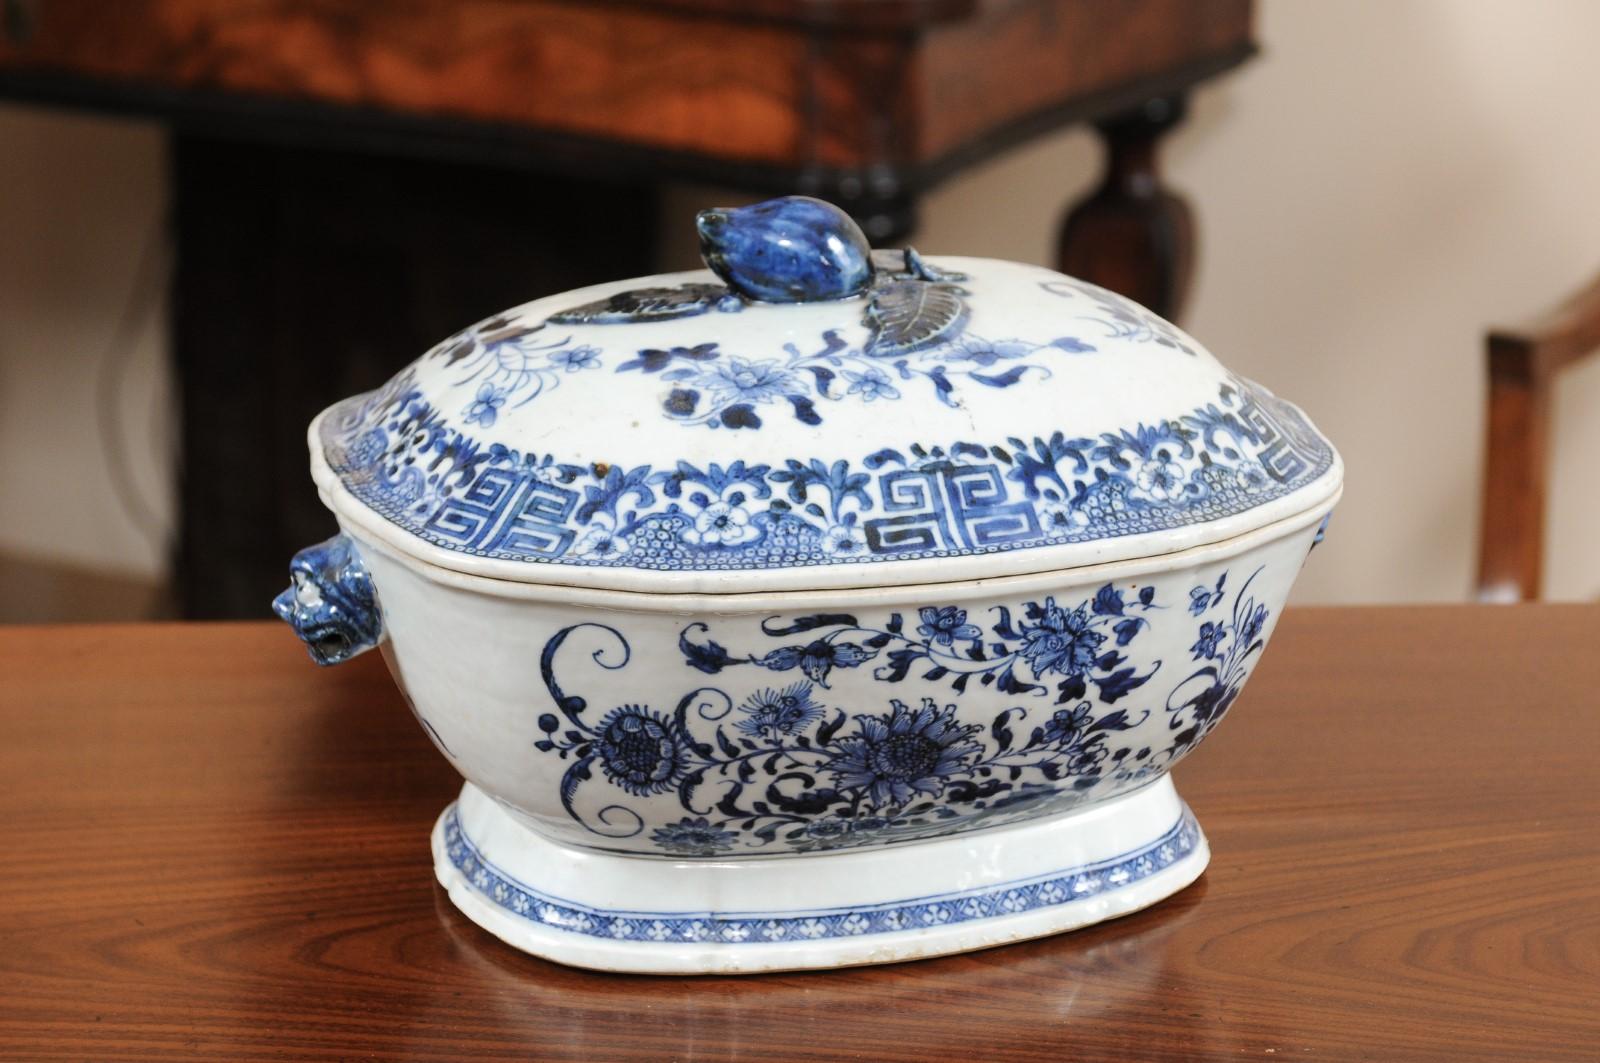 Blue & White Covered Tureen with Greek Key Design & Tiger Head Handles, Chinese ca. 1780.